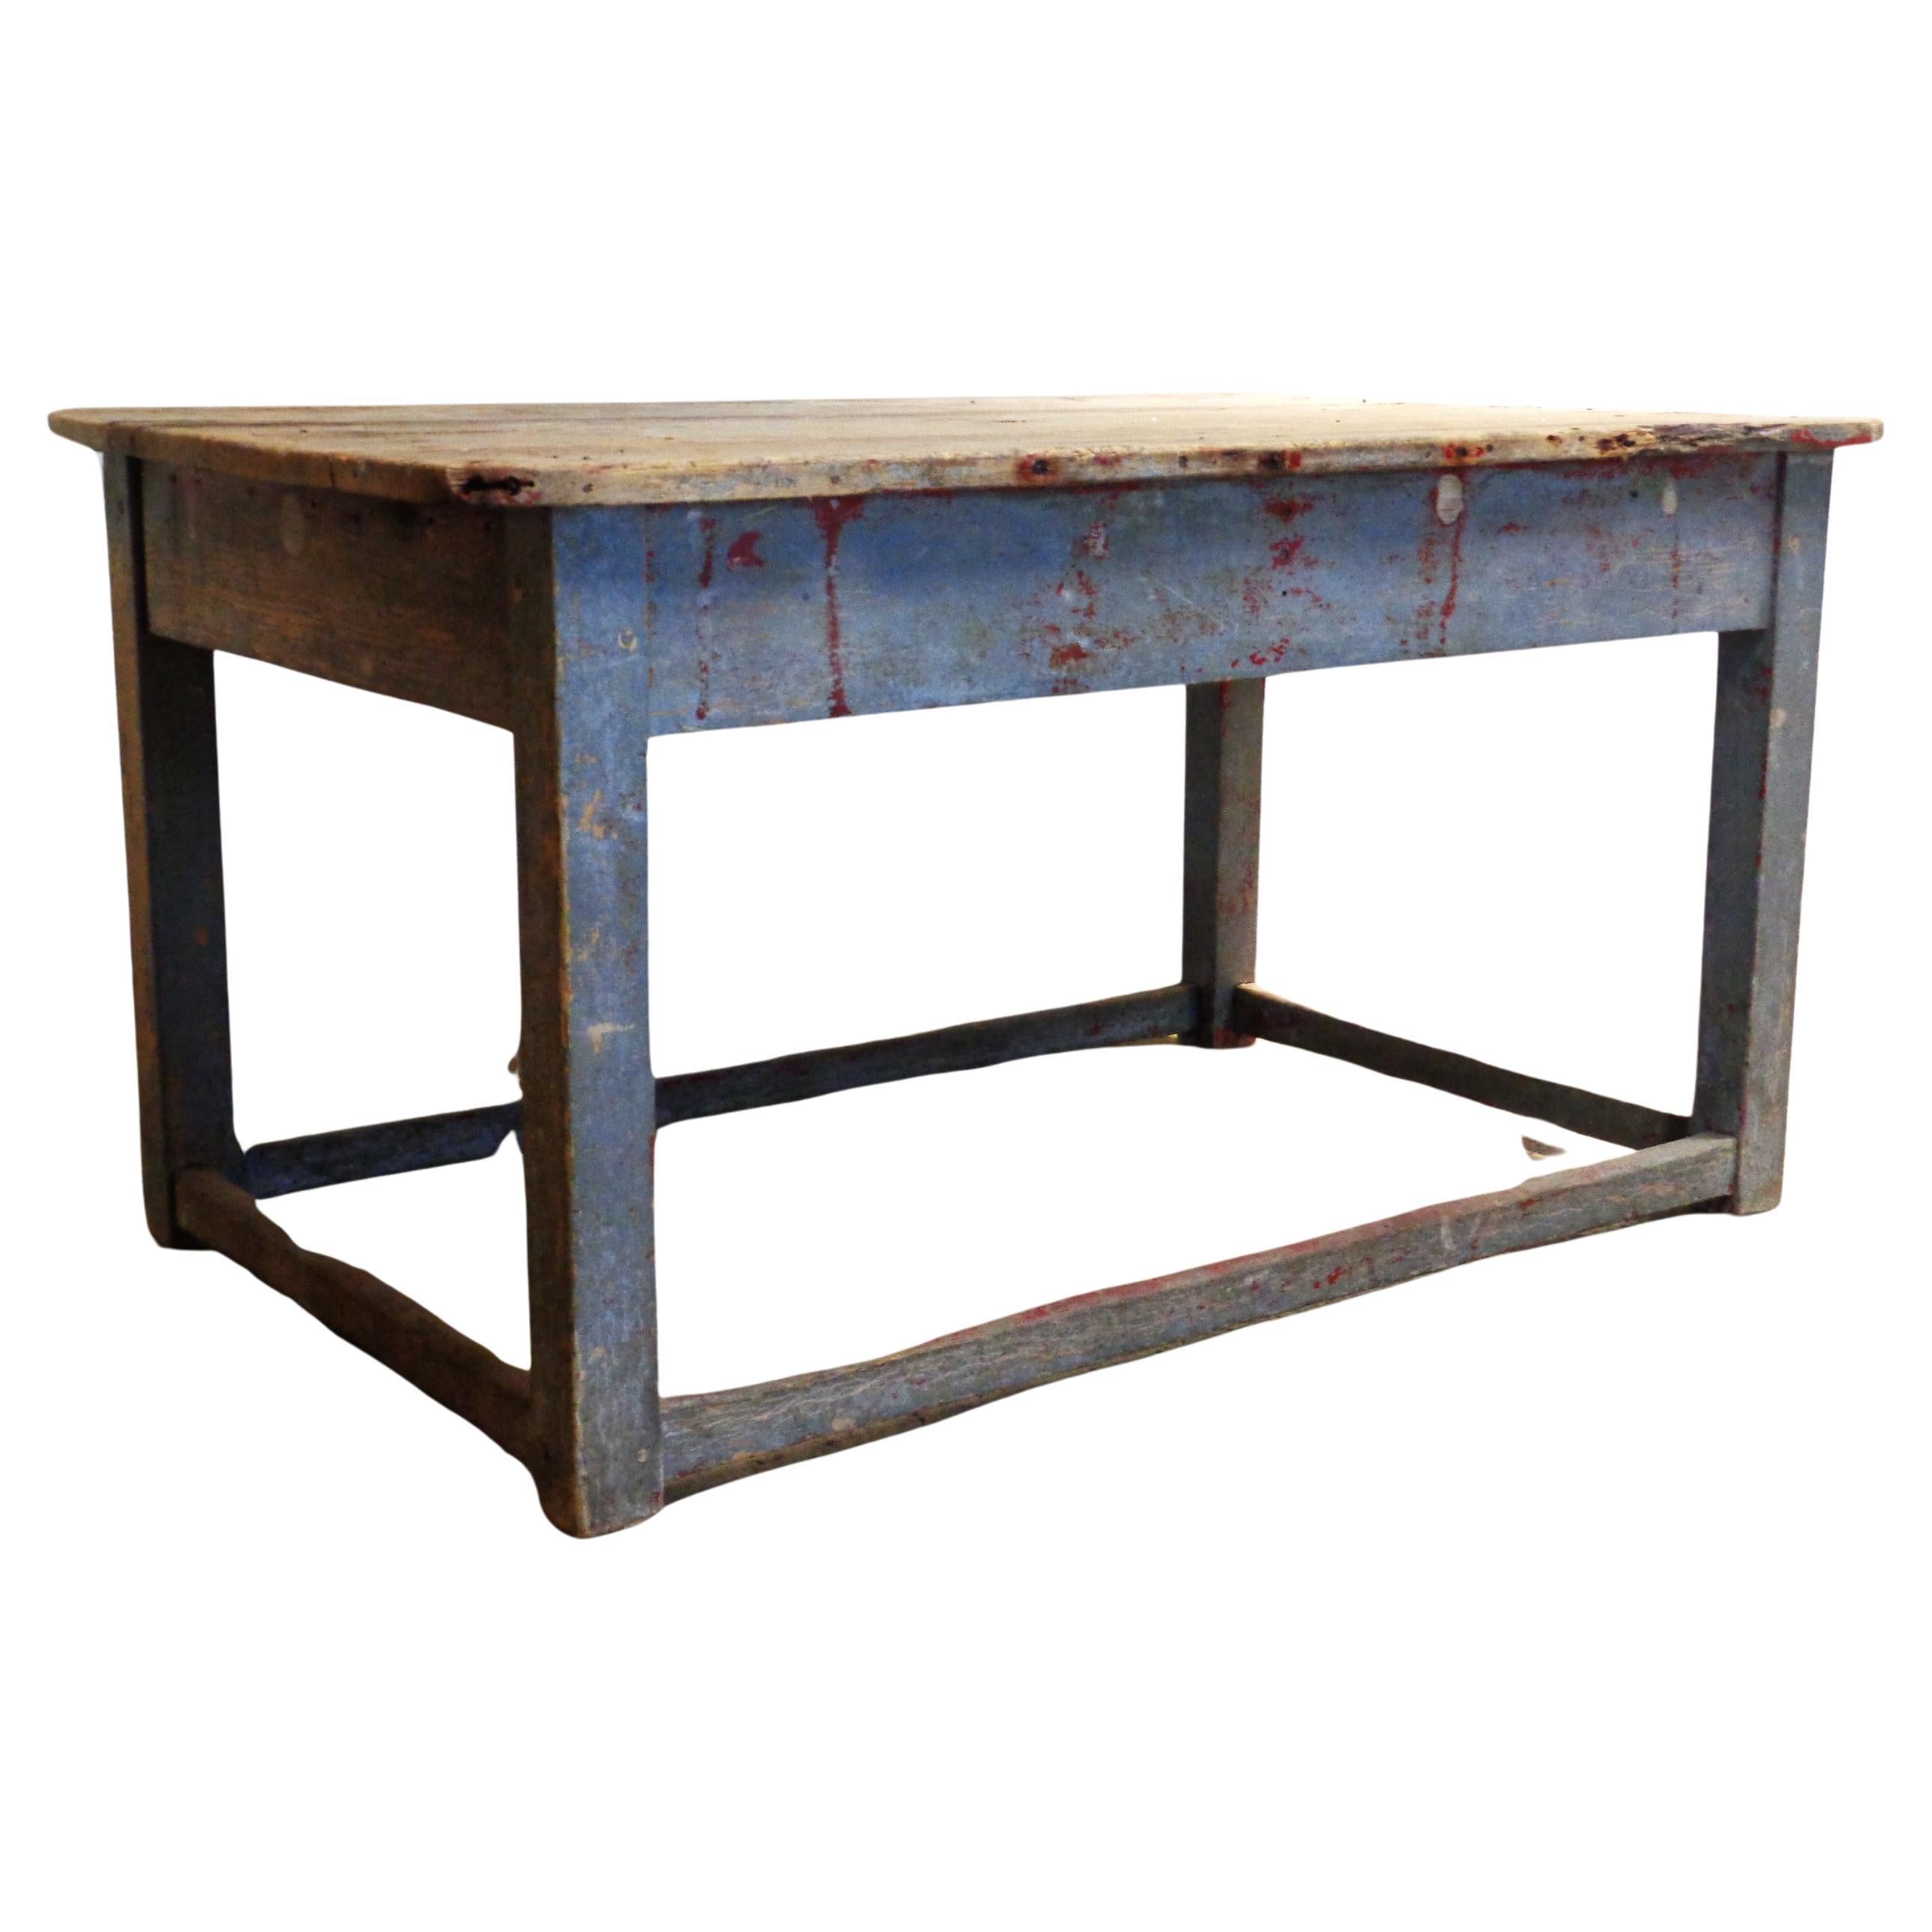  Early 19th Century Original Blue Painted Rustic Work Table  im Angebot